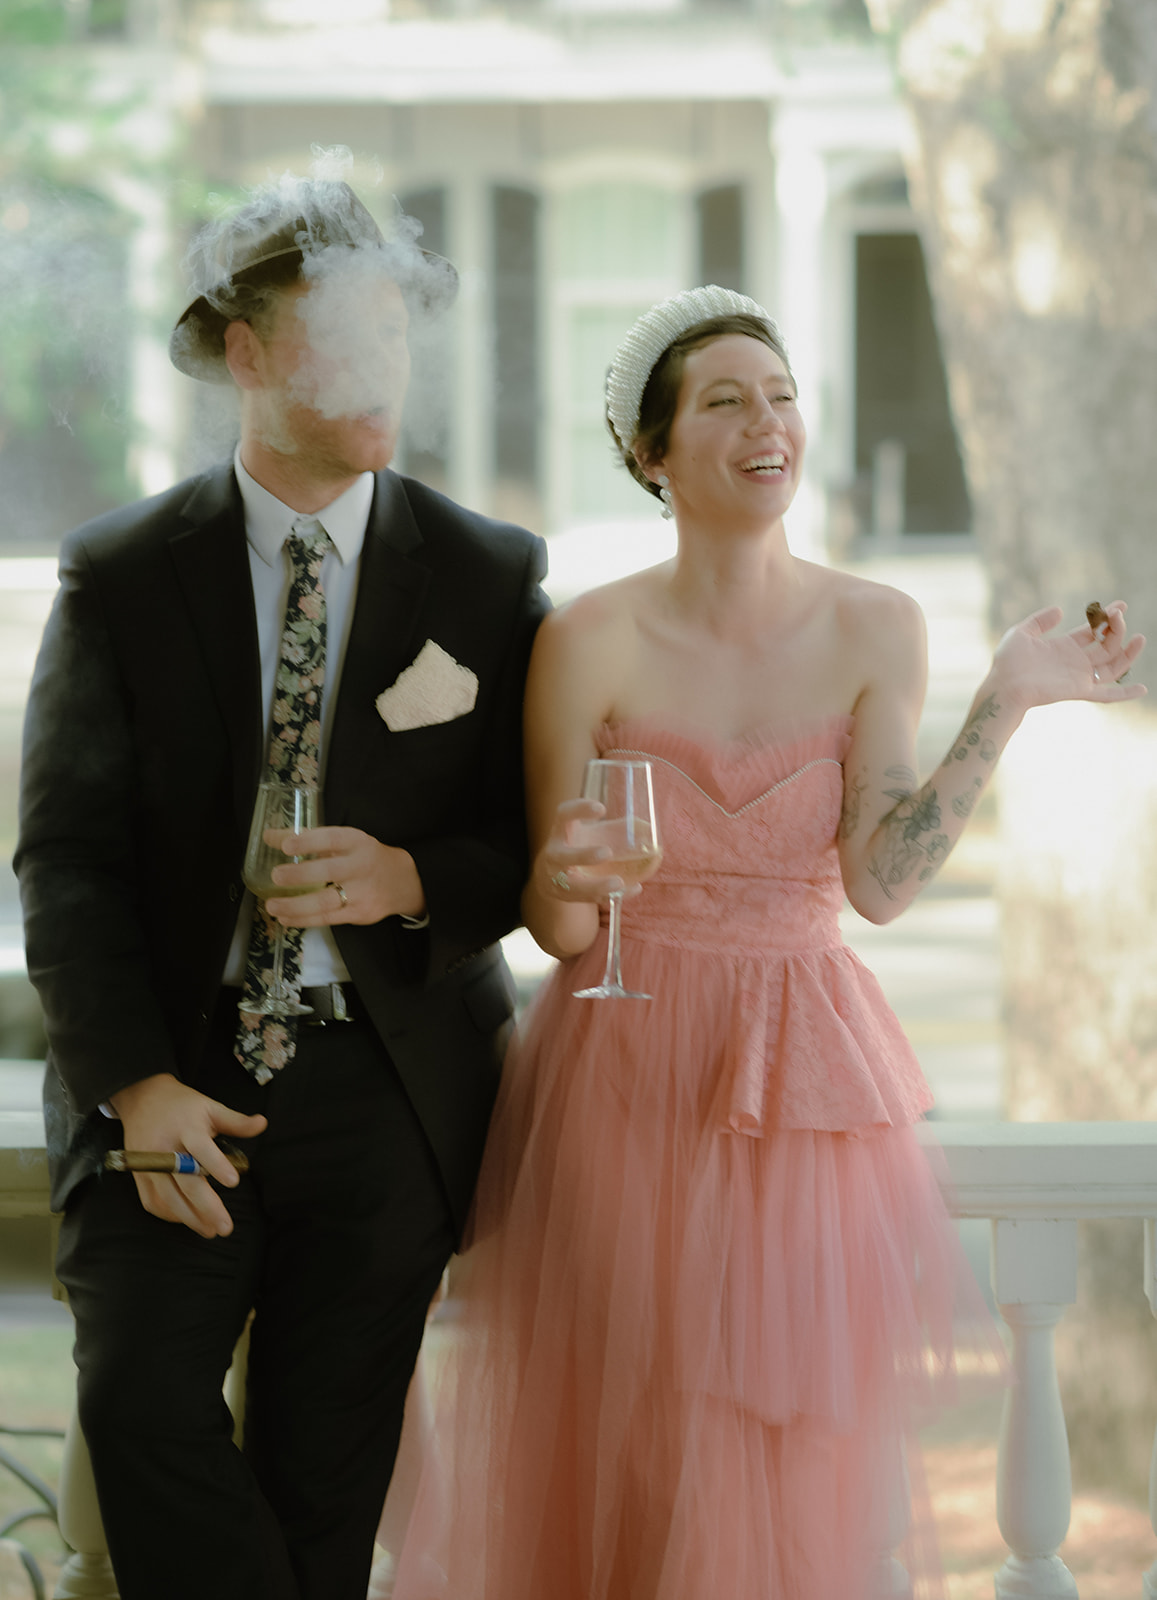 Celebrating with champagne and cigars on the porch of their bed and breakfast after their elopement